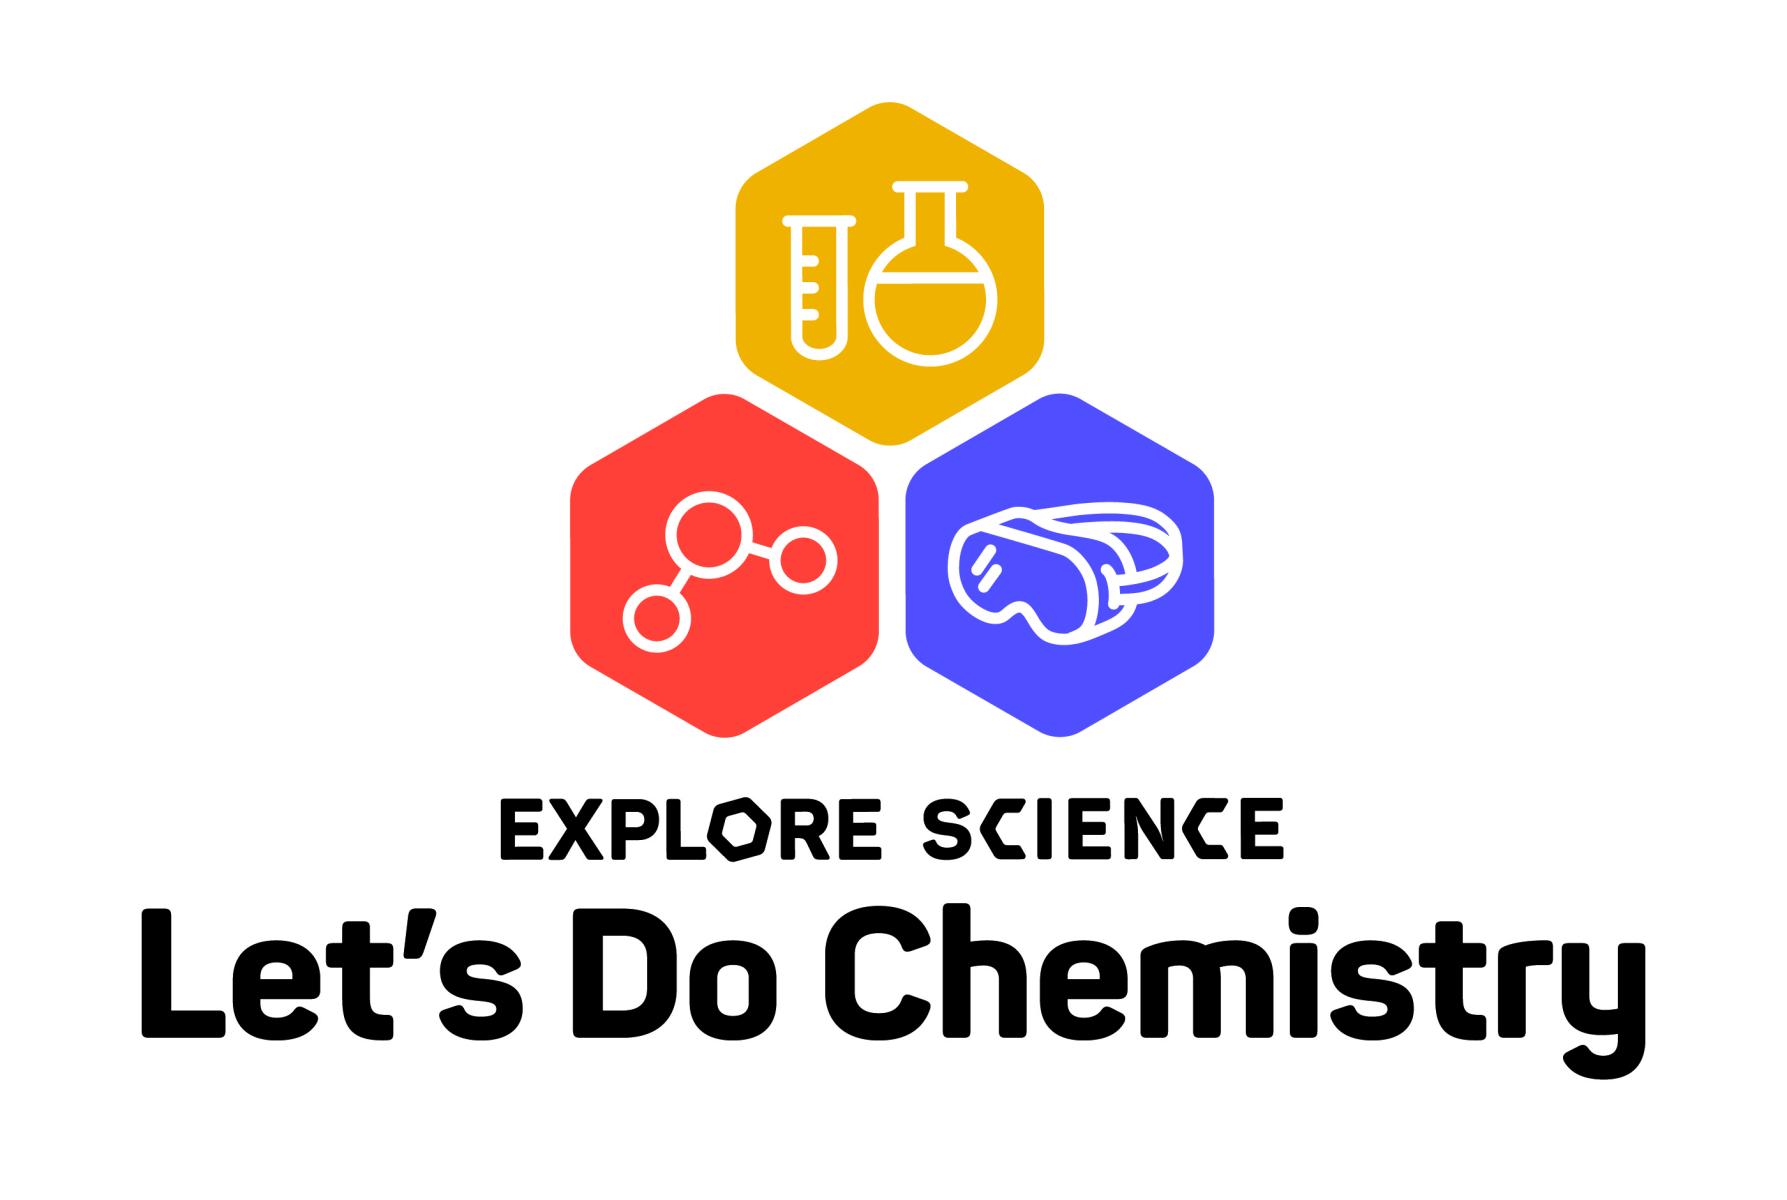 Explore Science Let's Do Chemistry logo - 3 hexagons, gold with test tube symbol, blue with goggles, red with molecule symbol